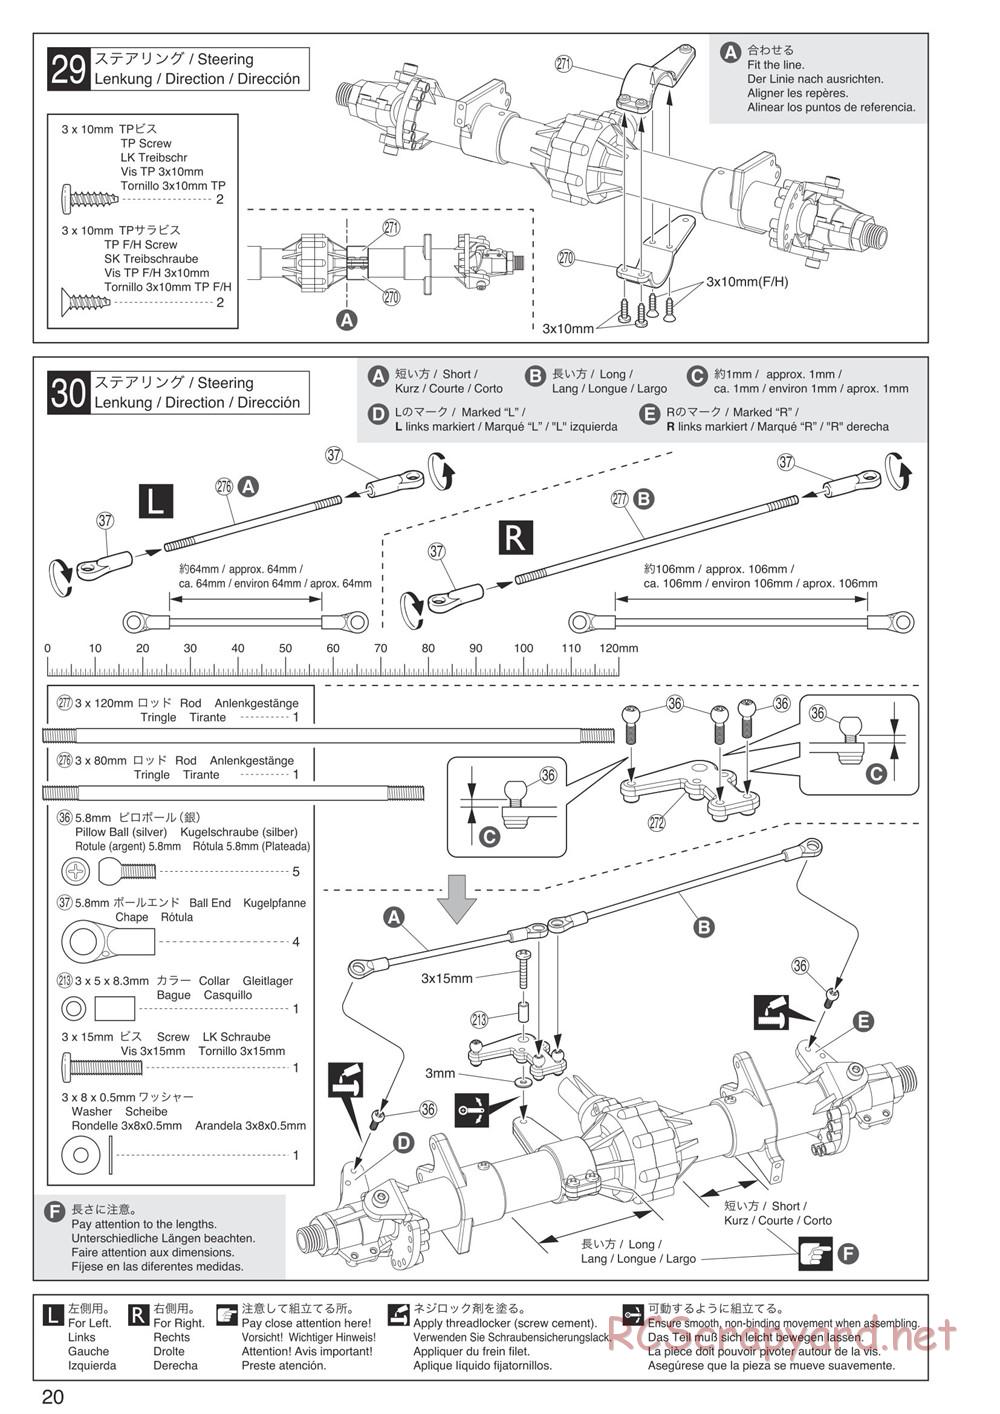 Kyosho - FO-XX VE 2.0 - Manual - Page 20